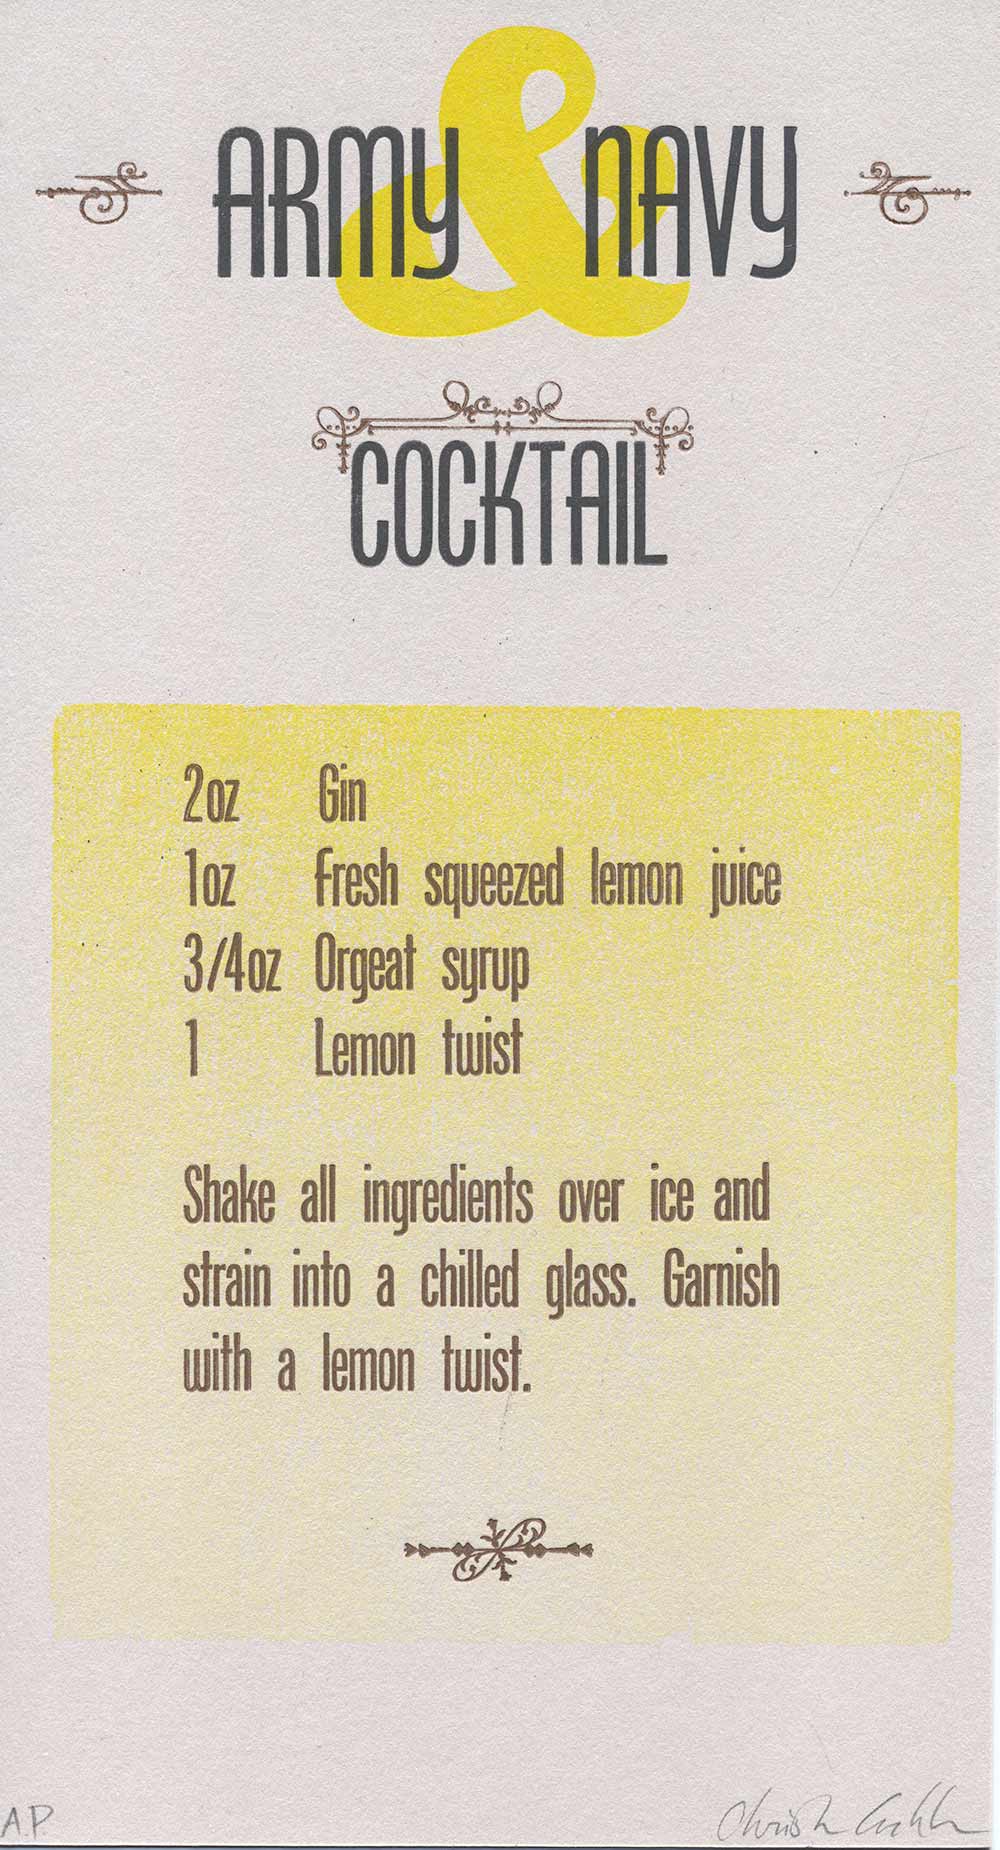 Army Navy Cocktail